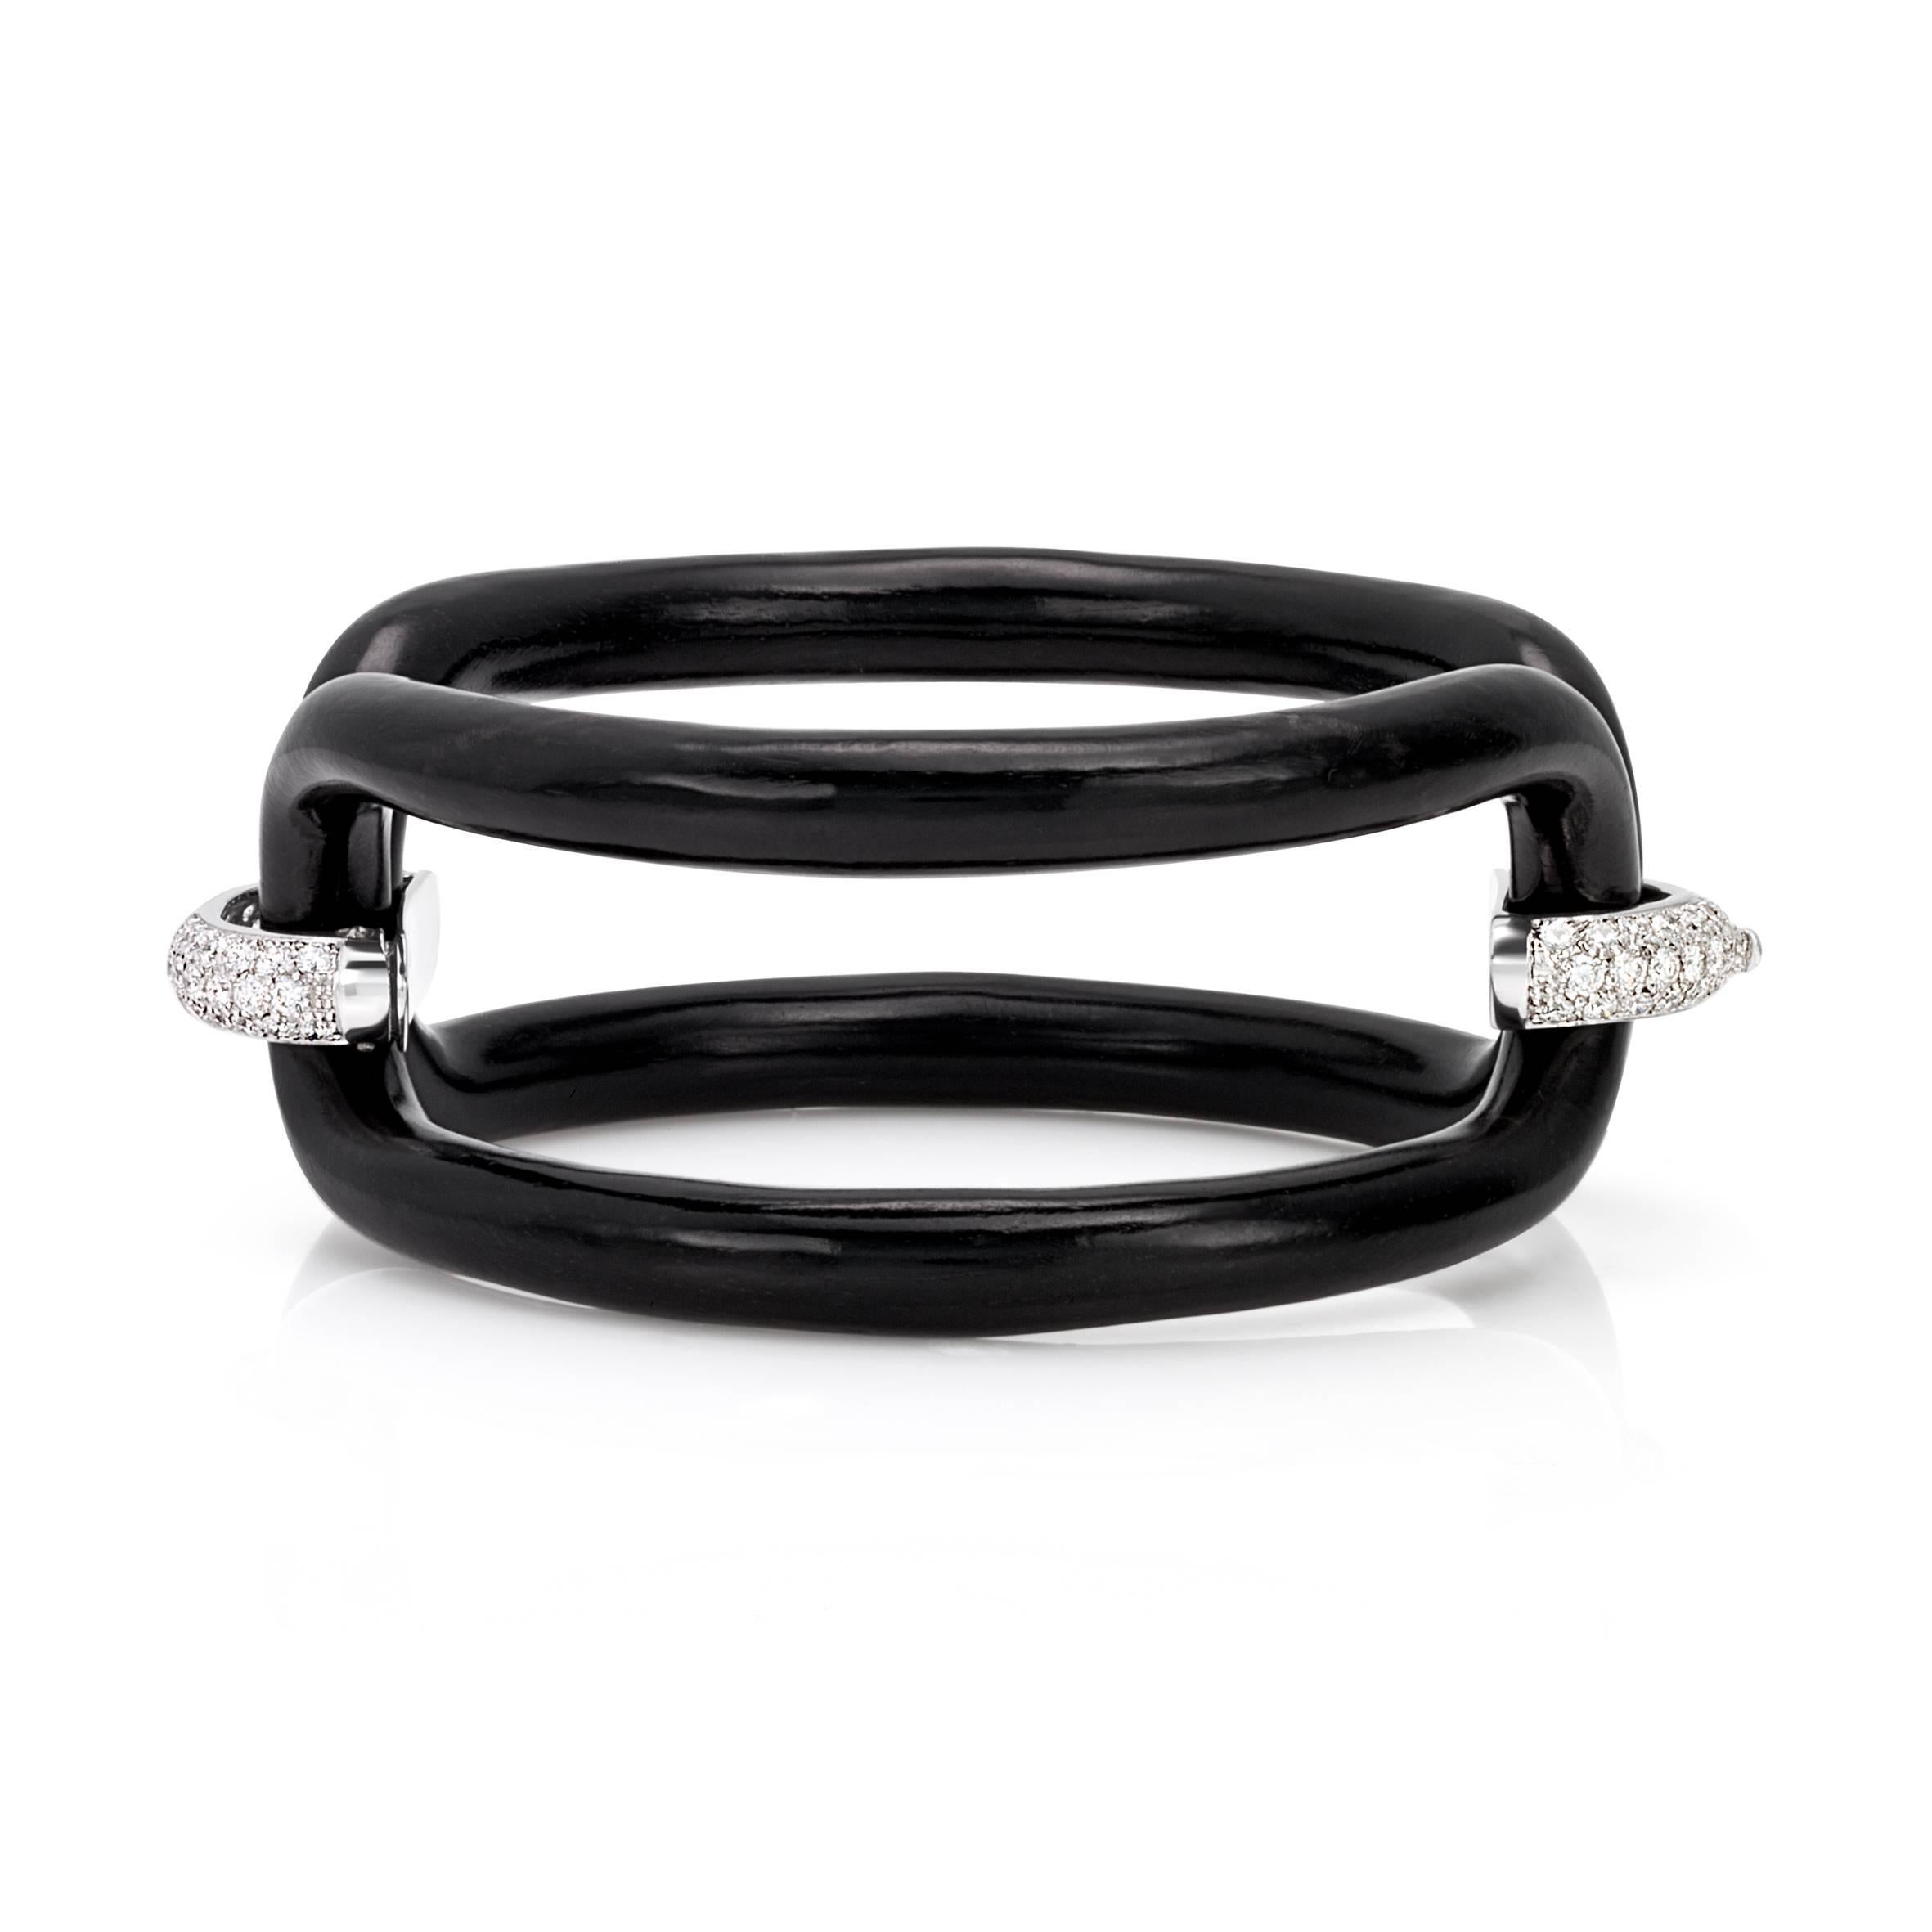 Roberta collection bangle in 18 kt  wood ebony and white gold and white diamonds 
The newest and more popular collection of his year

the total weight of the gold is  gr 11.90
the total weight of the white diamonds is ct 1.61 - color GH clarity